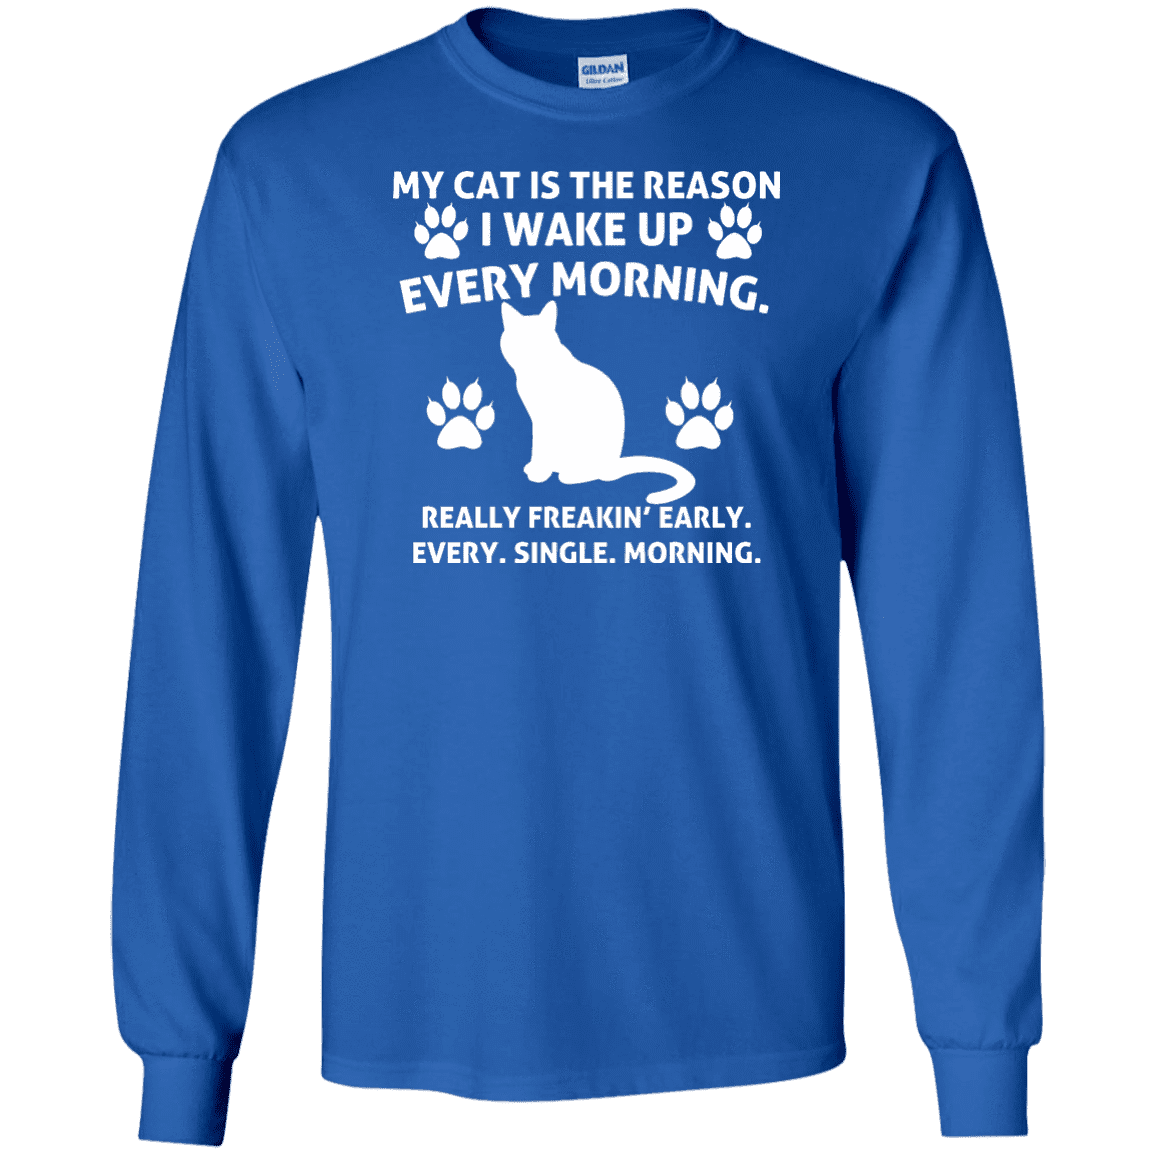 My Cat Is The Reason - Long Sleeve T shirt.